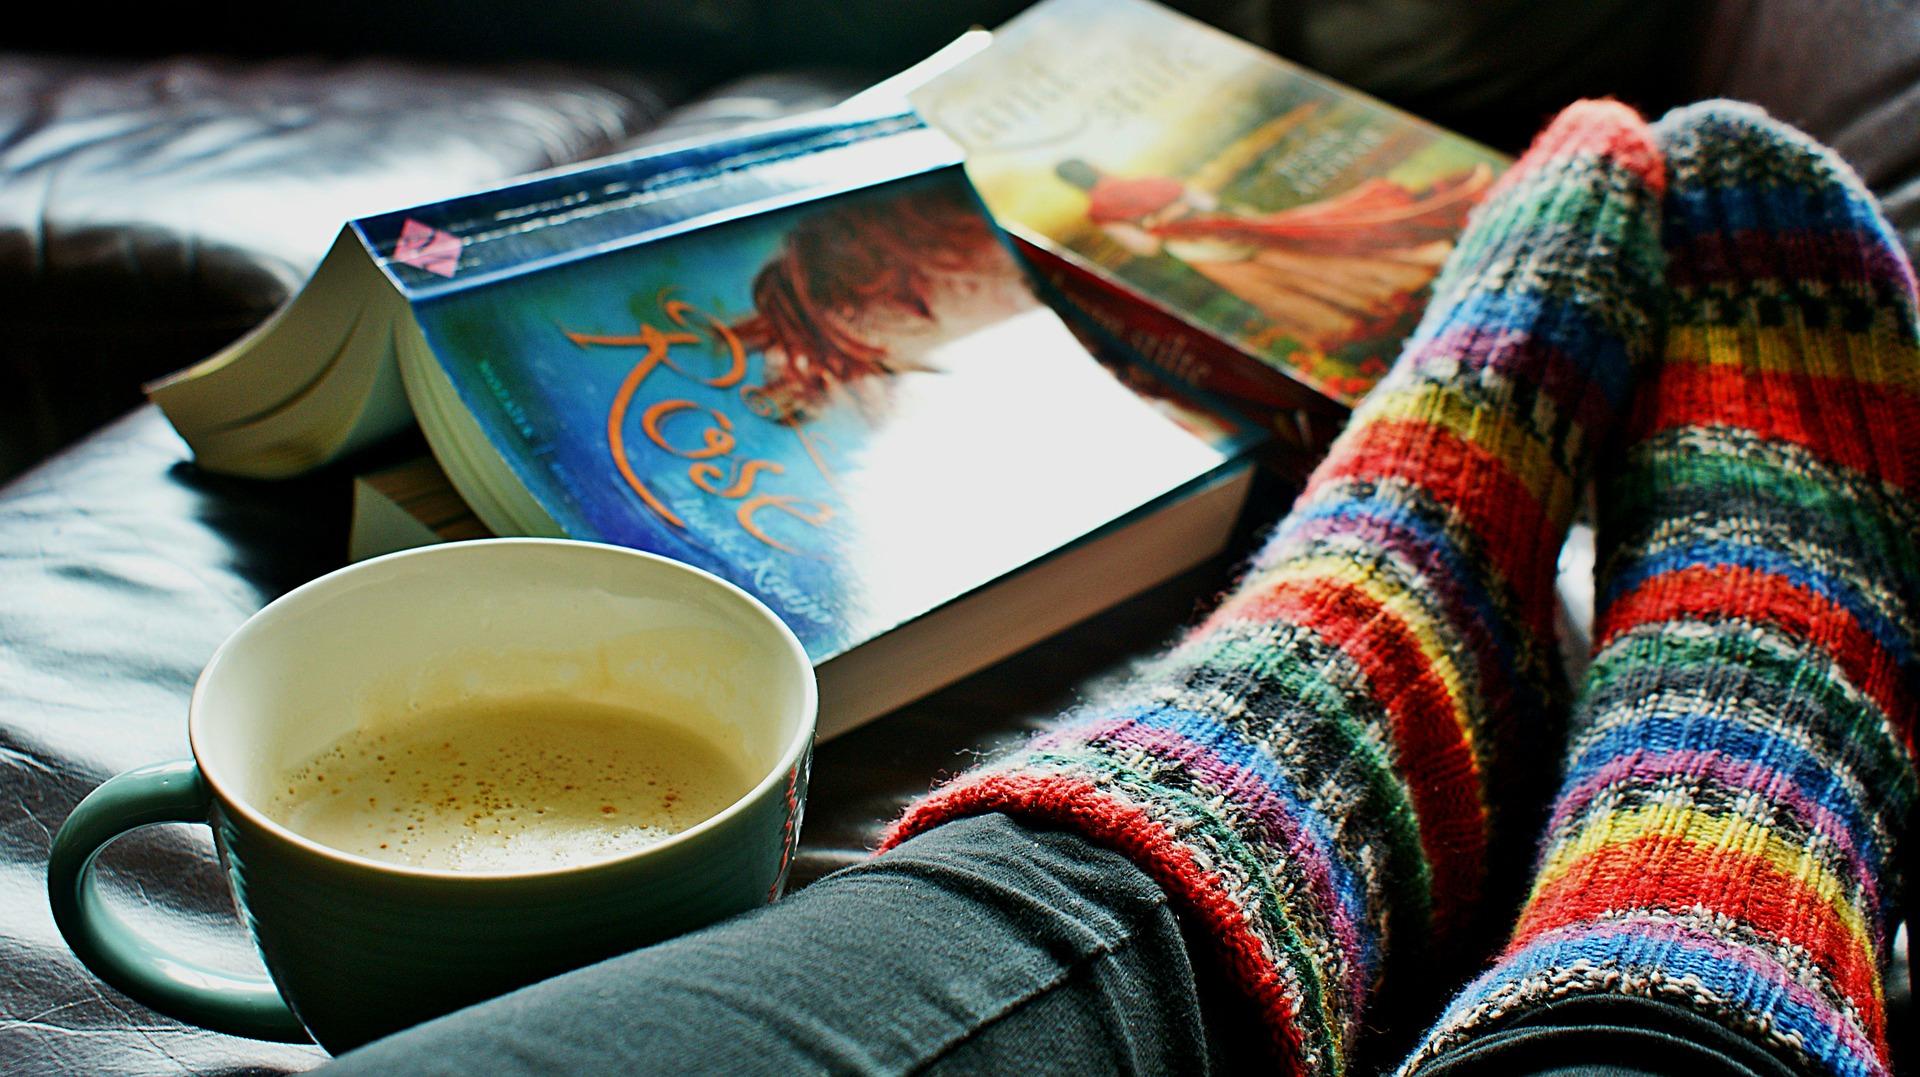 some feet with woolen socks by a cup of coffee and a book